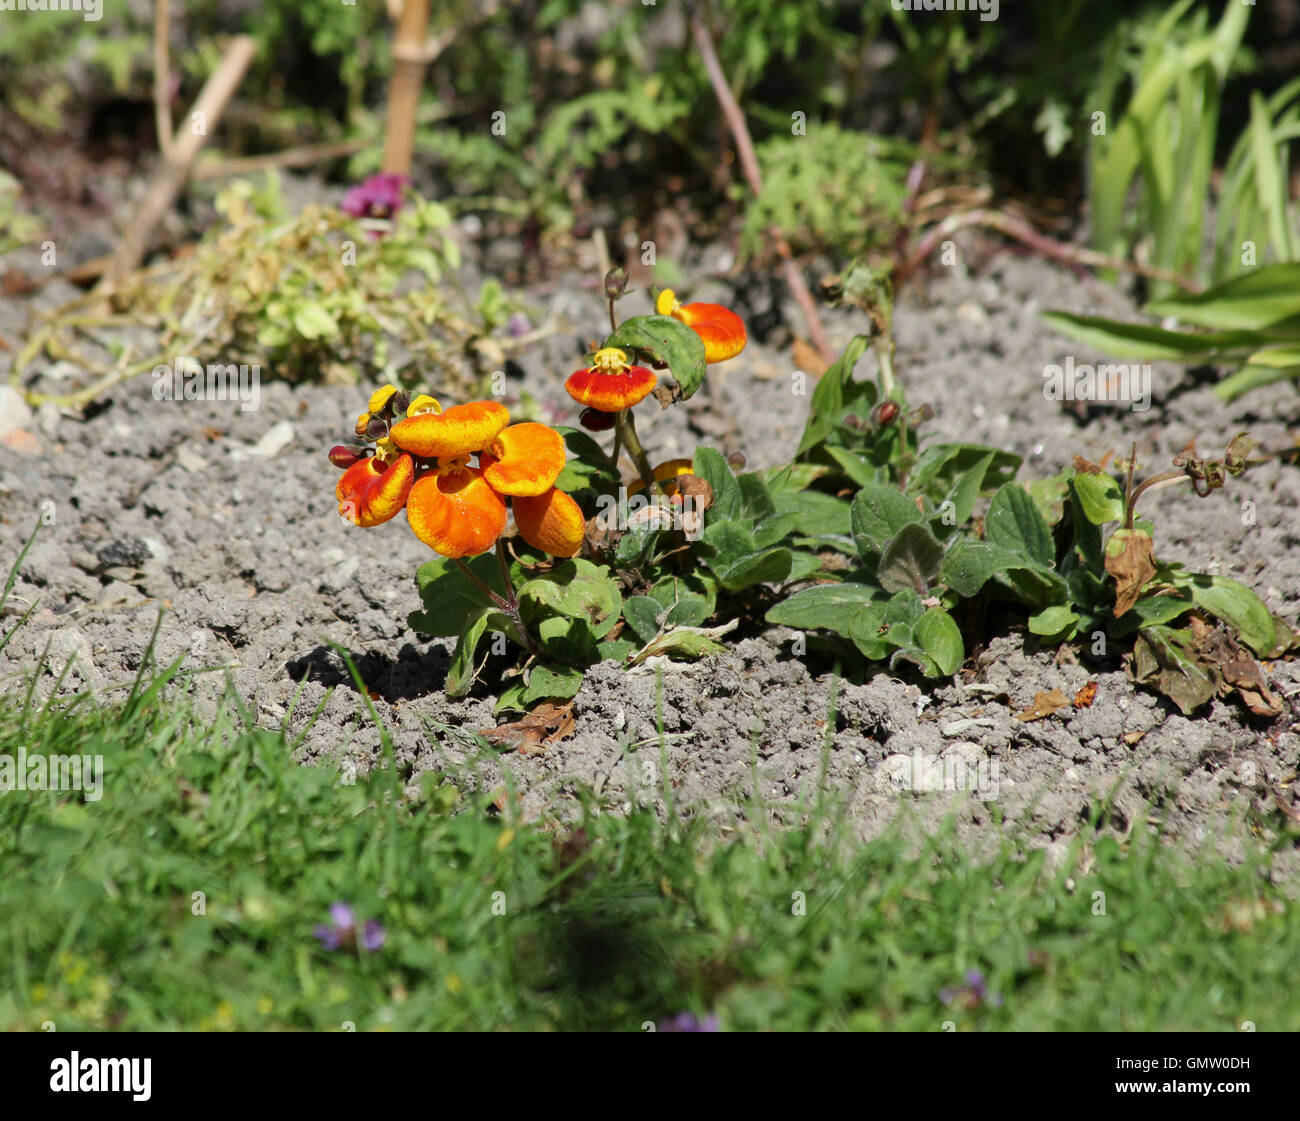 Calceolaria 'yellow & orange' at the edge of a chalk soil flowerbed in a grass lawn in sunshine Stock Photo